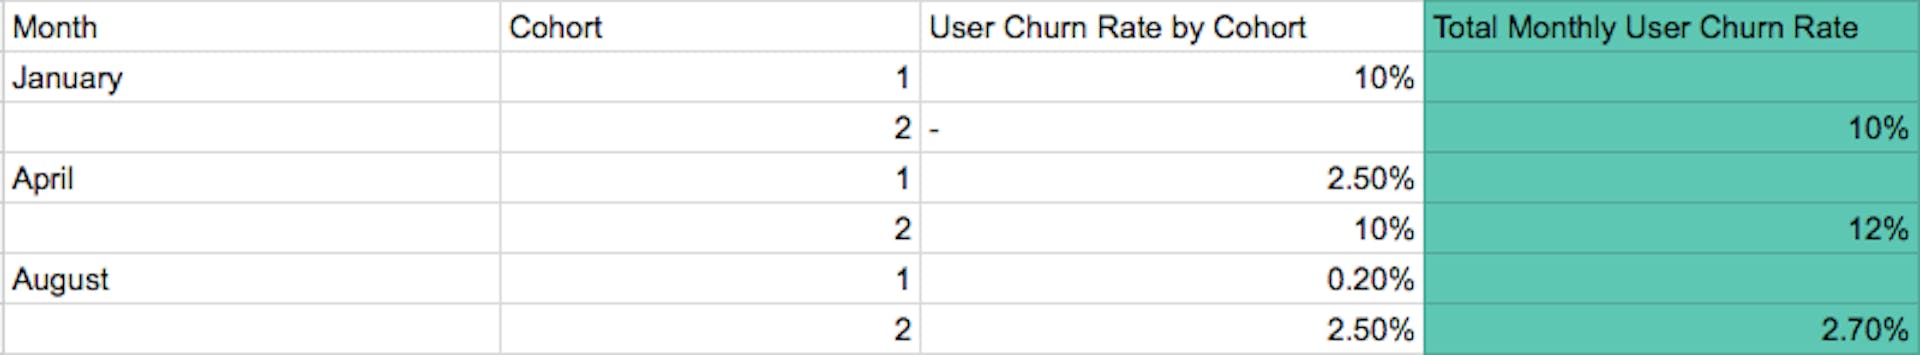 April Total monthly user churn rate = 12%. August total monthly user churn rate: 2.70%. By cohort those numbers are 10% and 2.5% respectively.